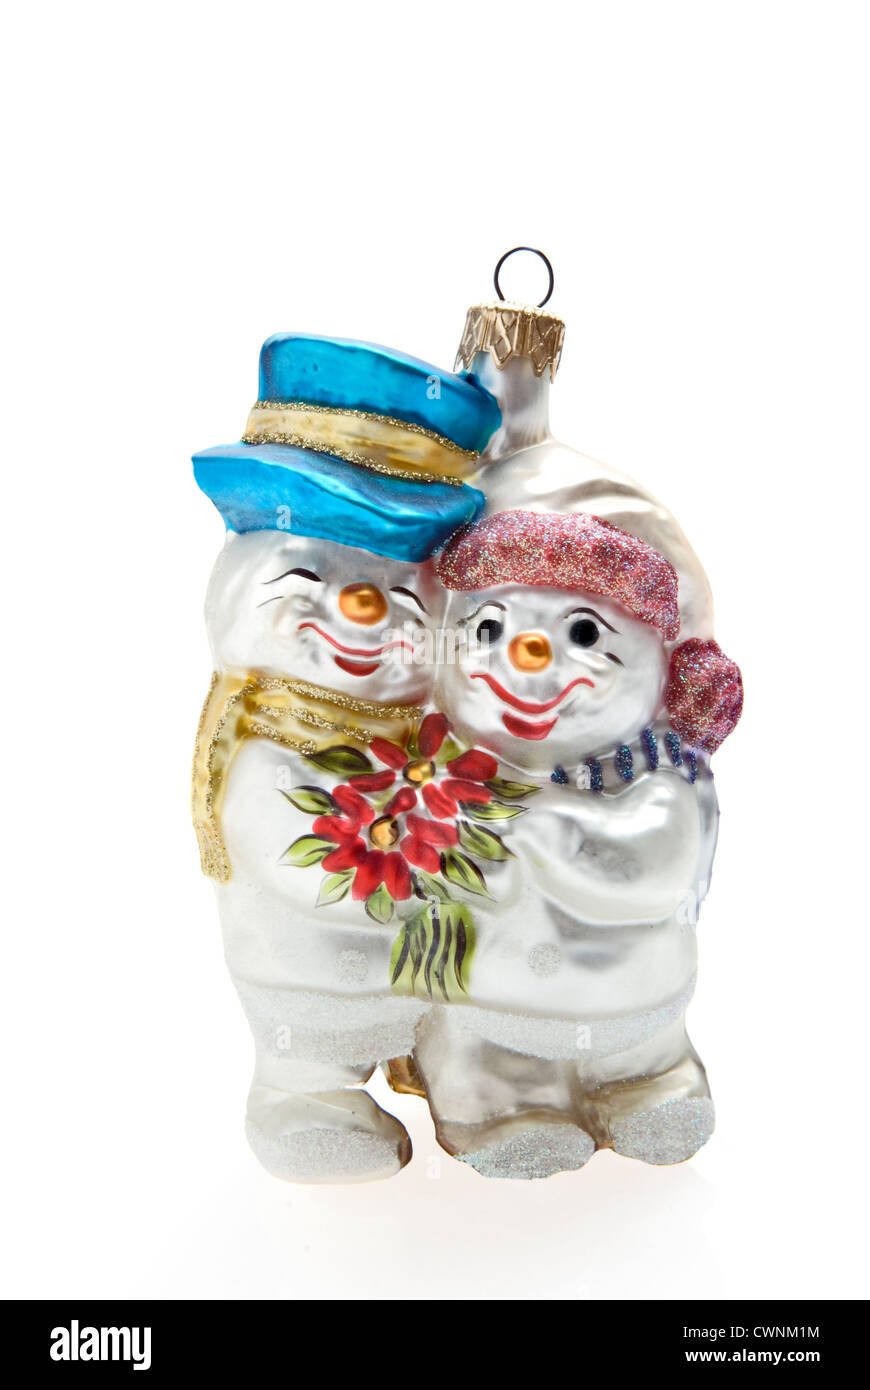 Snowman and snowwoman couple, Christmas tree decorations, isolated on 100% white background Stock Photo